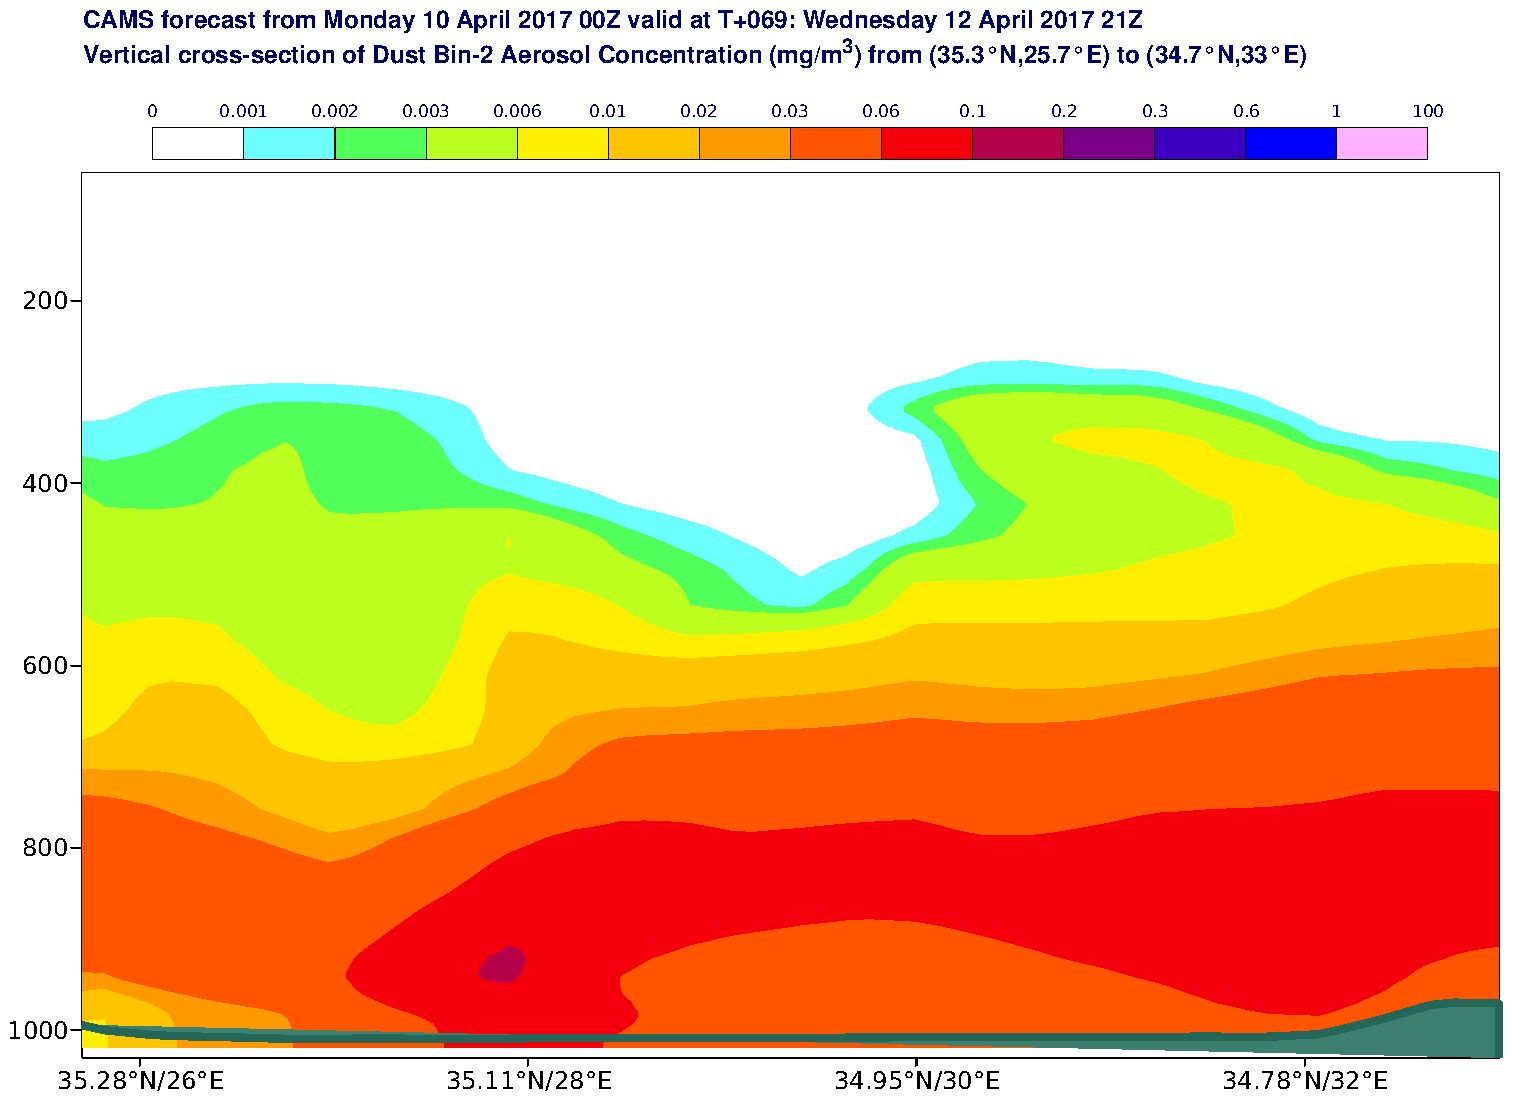 Vertical cross-section of Dust Bin-2 Aerosol Concentration (mg/m3) valid at T69 - 2017-04-12 21:00